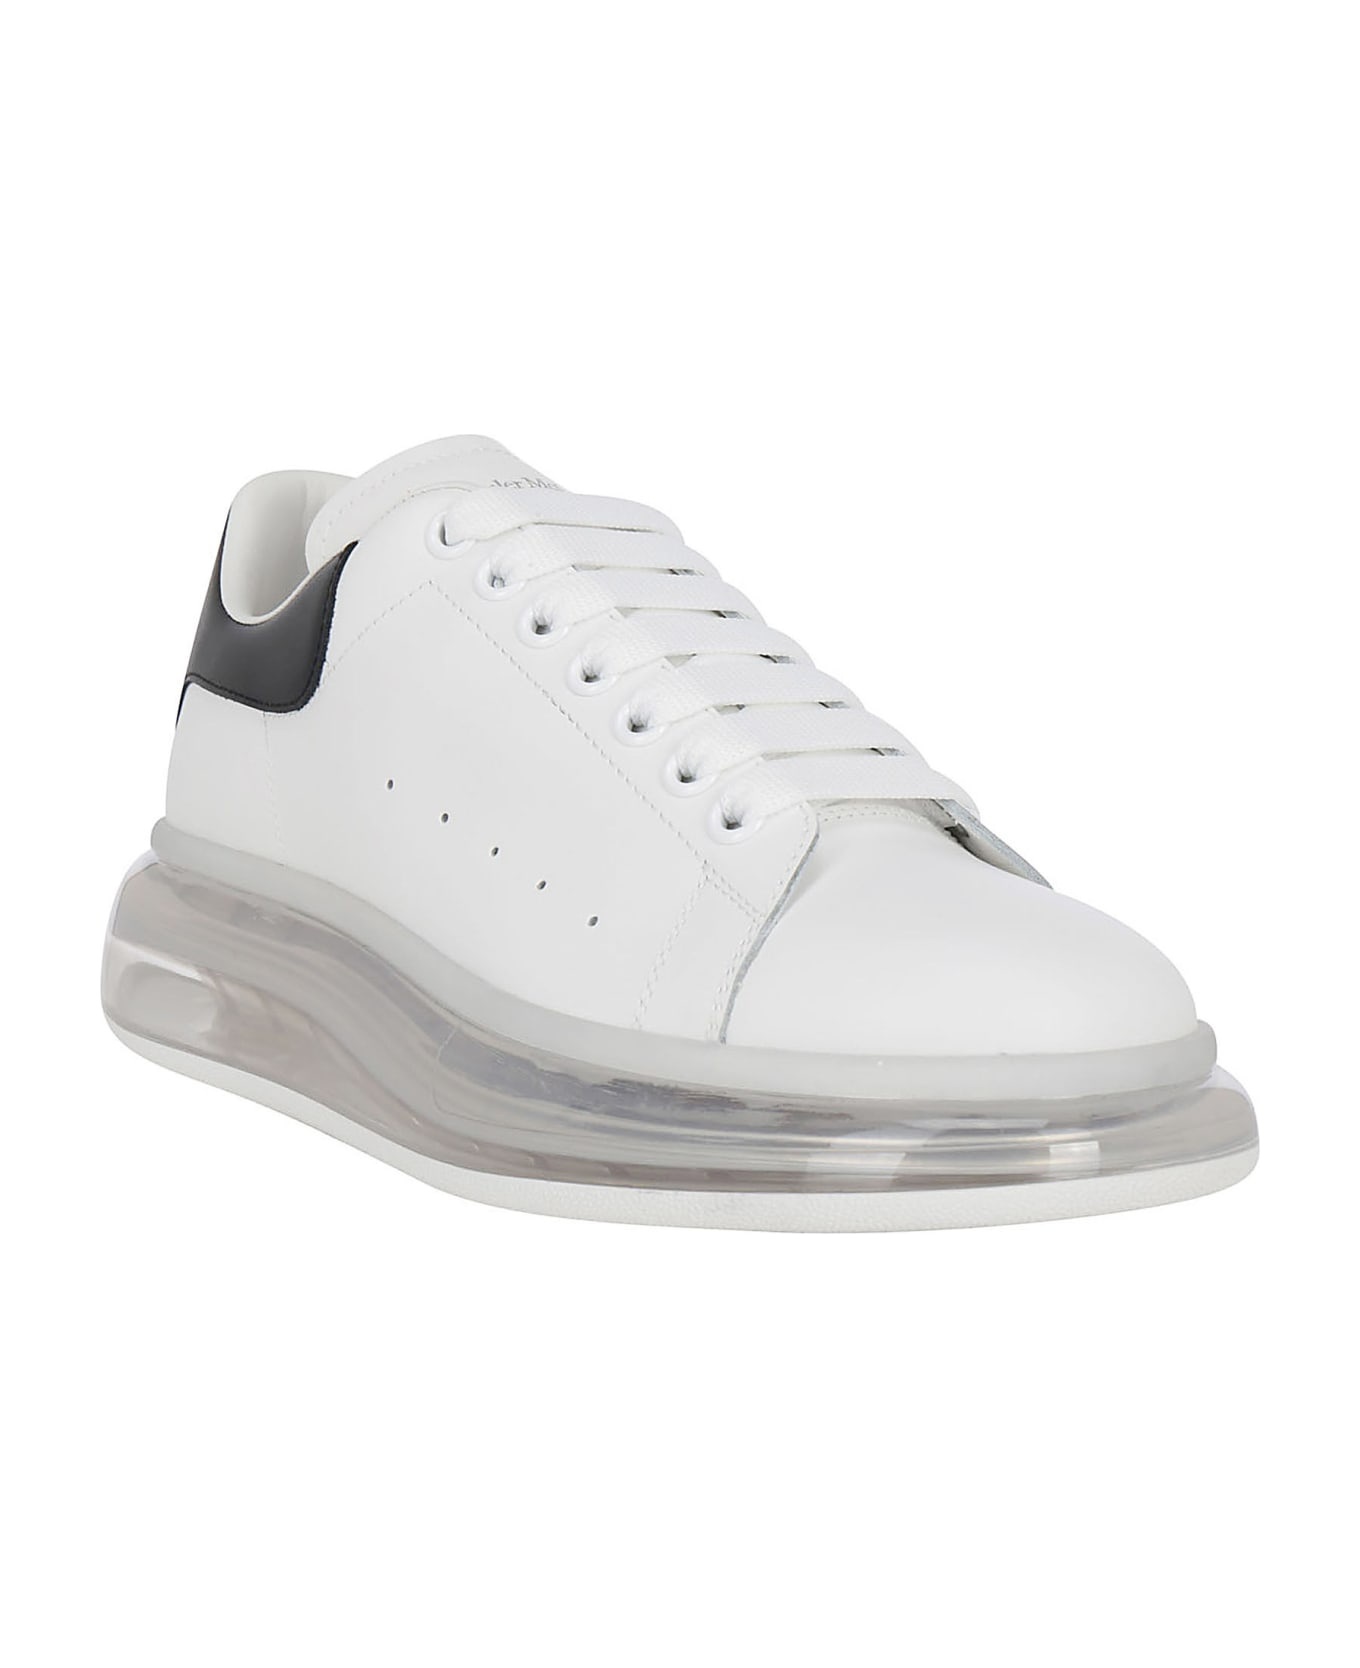 Oversized Sneakers In Leather With Contrasting Inserts - 4